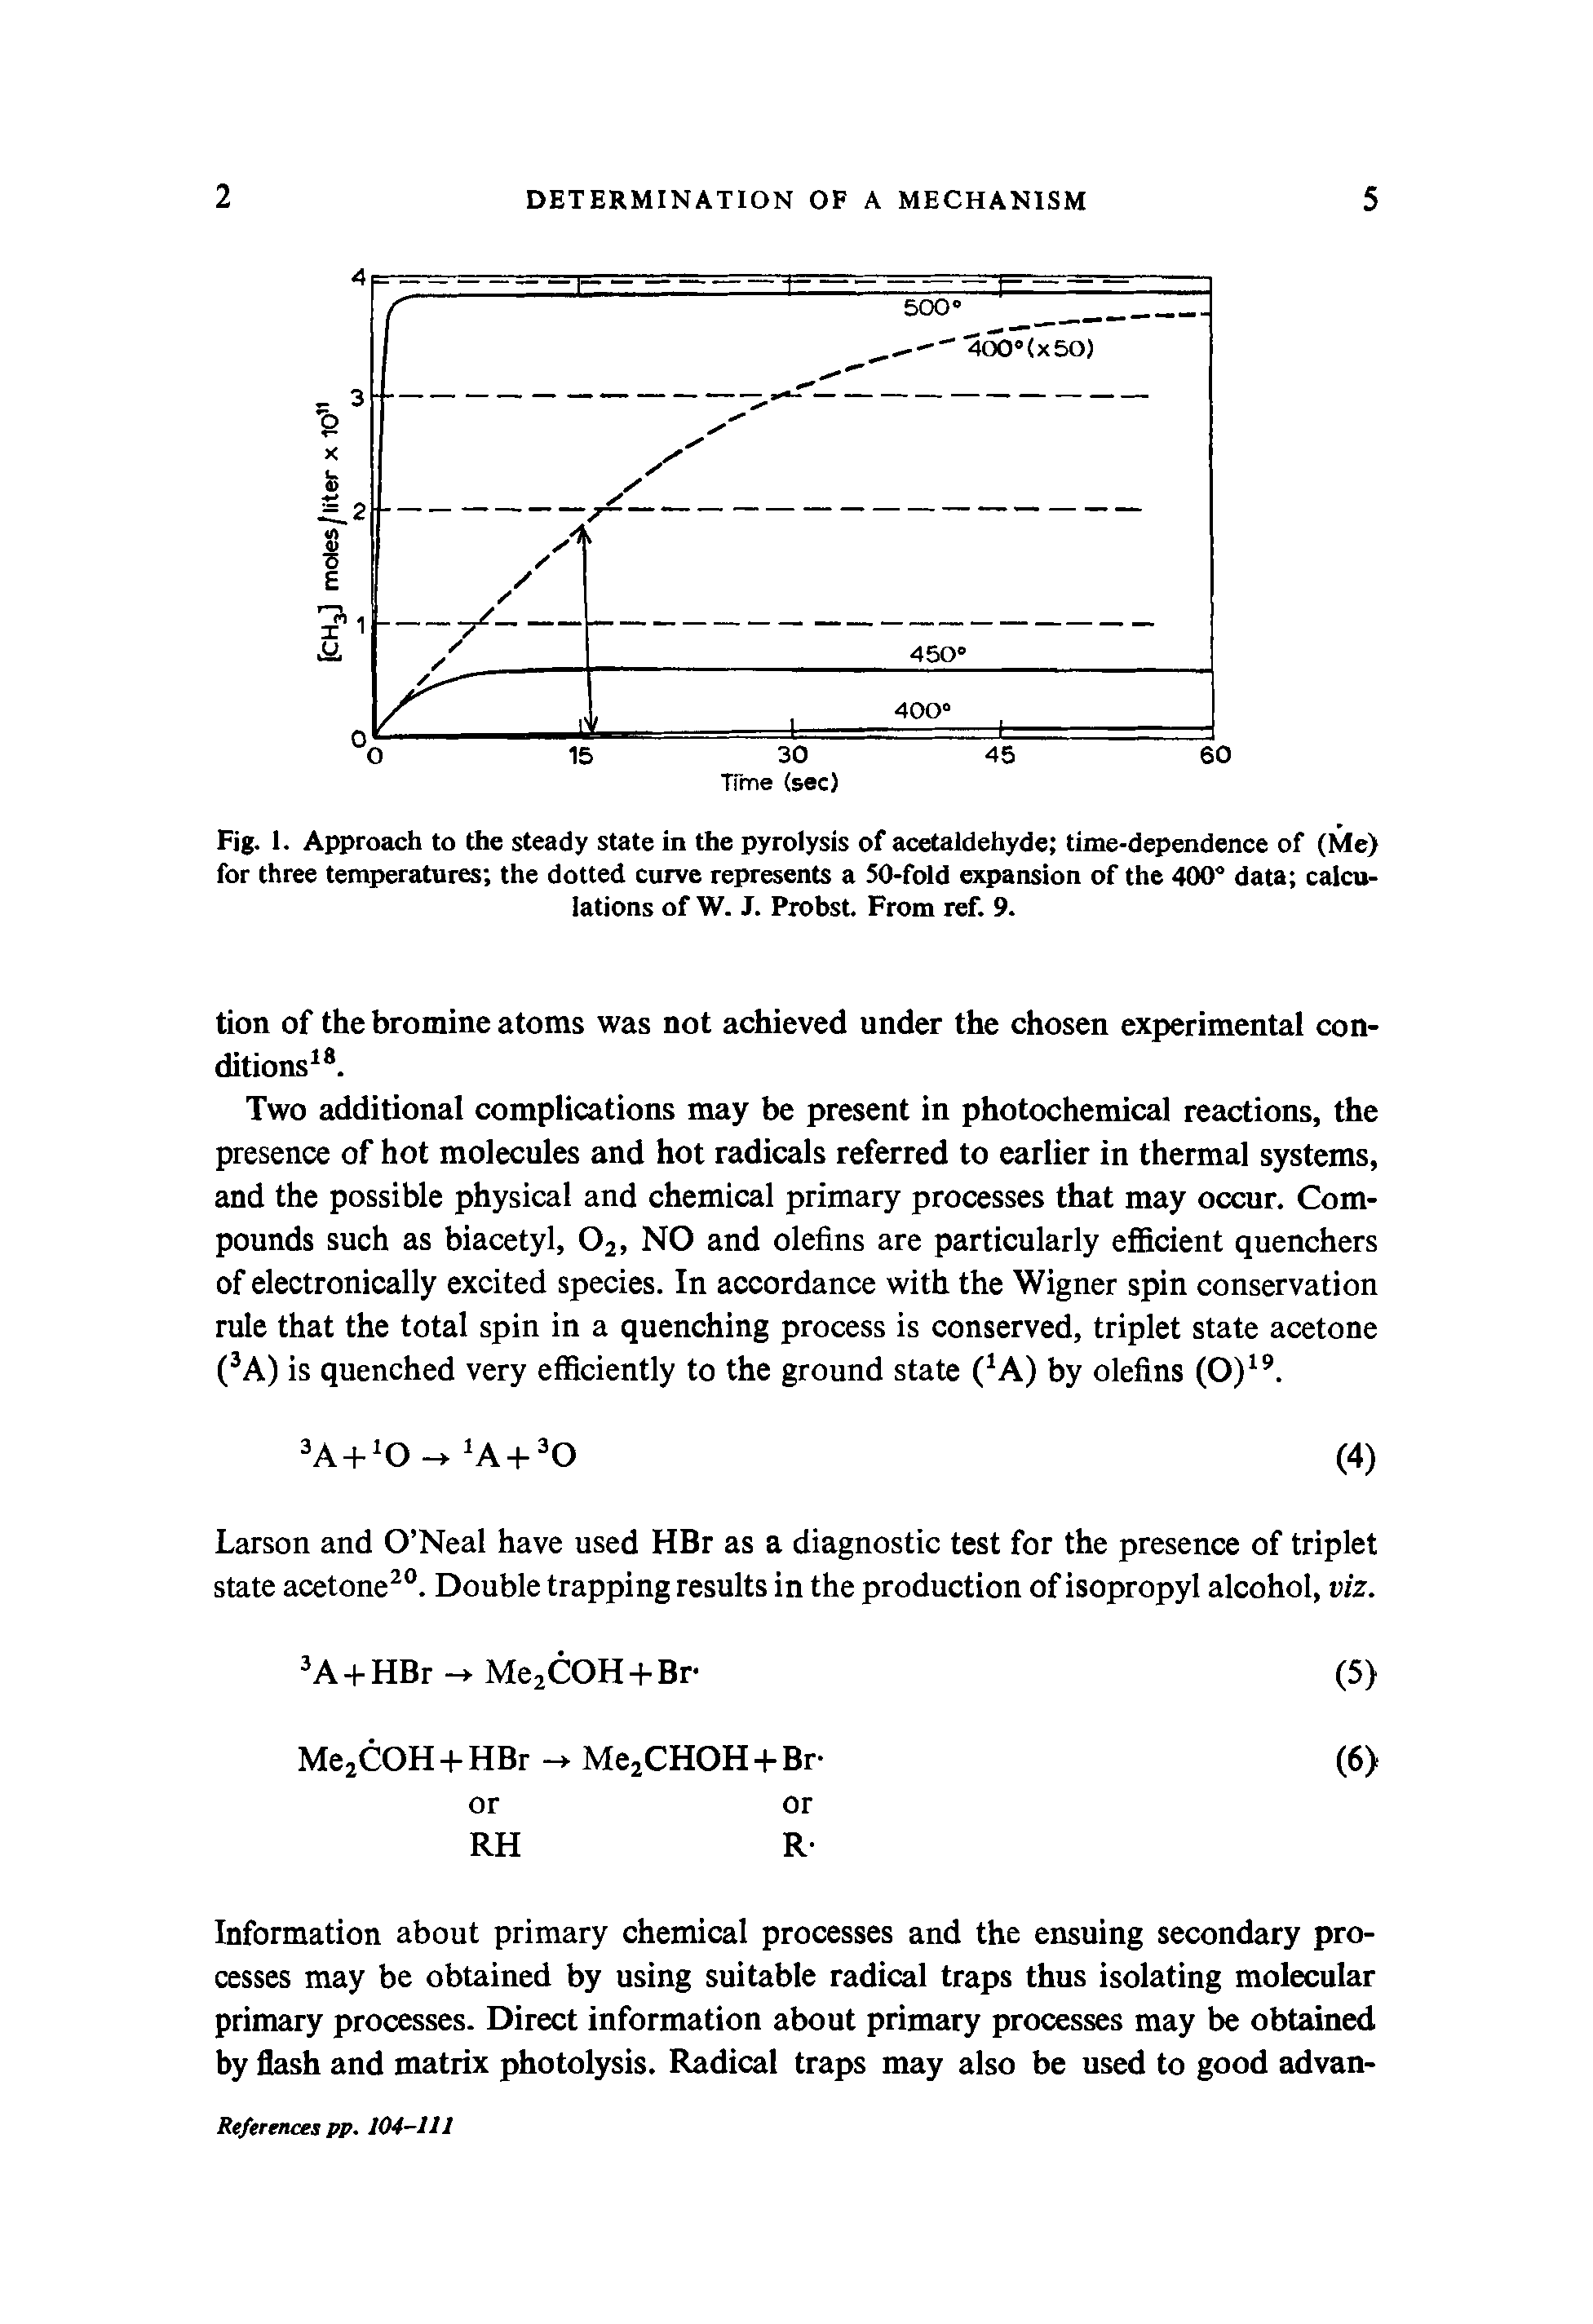 Fig. 1. Approach to the steady state in the pyrolysis of acetaldehyde time-dependence of (Me) for three temperatures the dotted curve represents a 50-fold expansion of the 400 data calculations of W. J. Probst. From ref. 9.